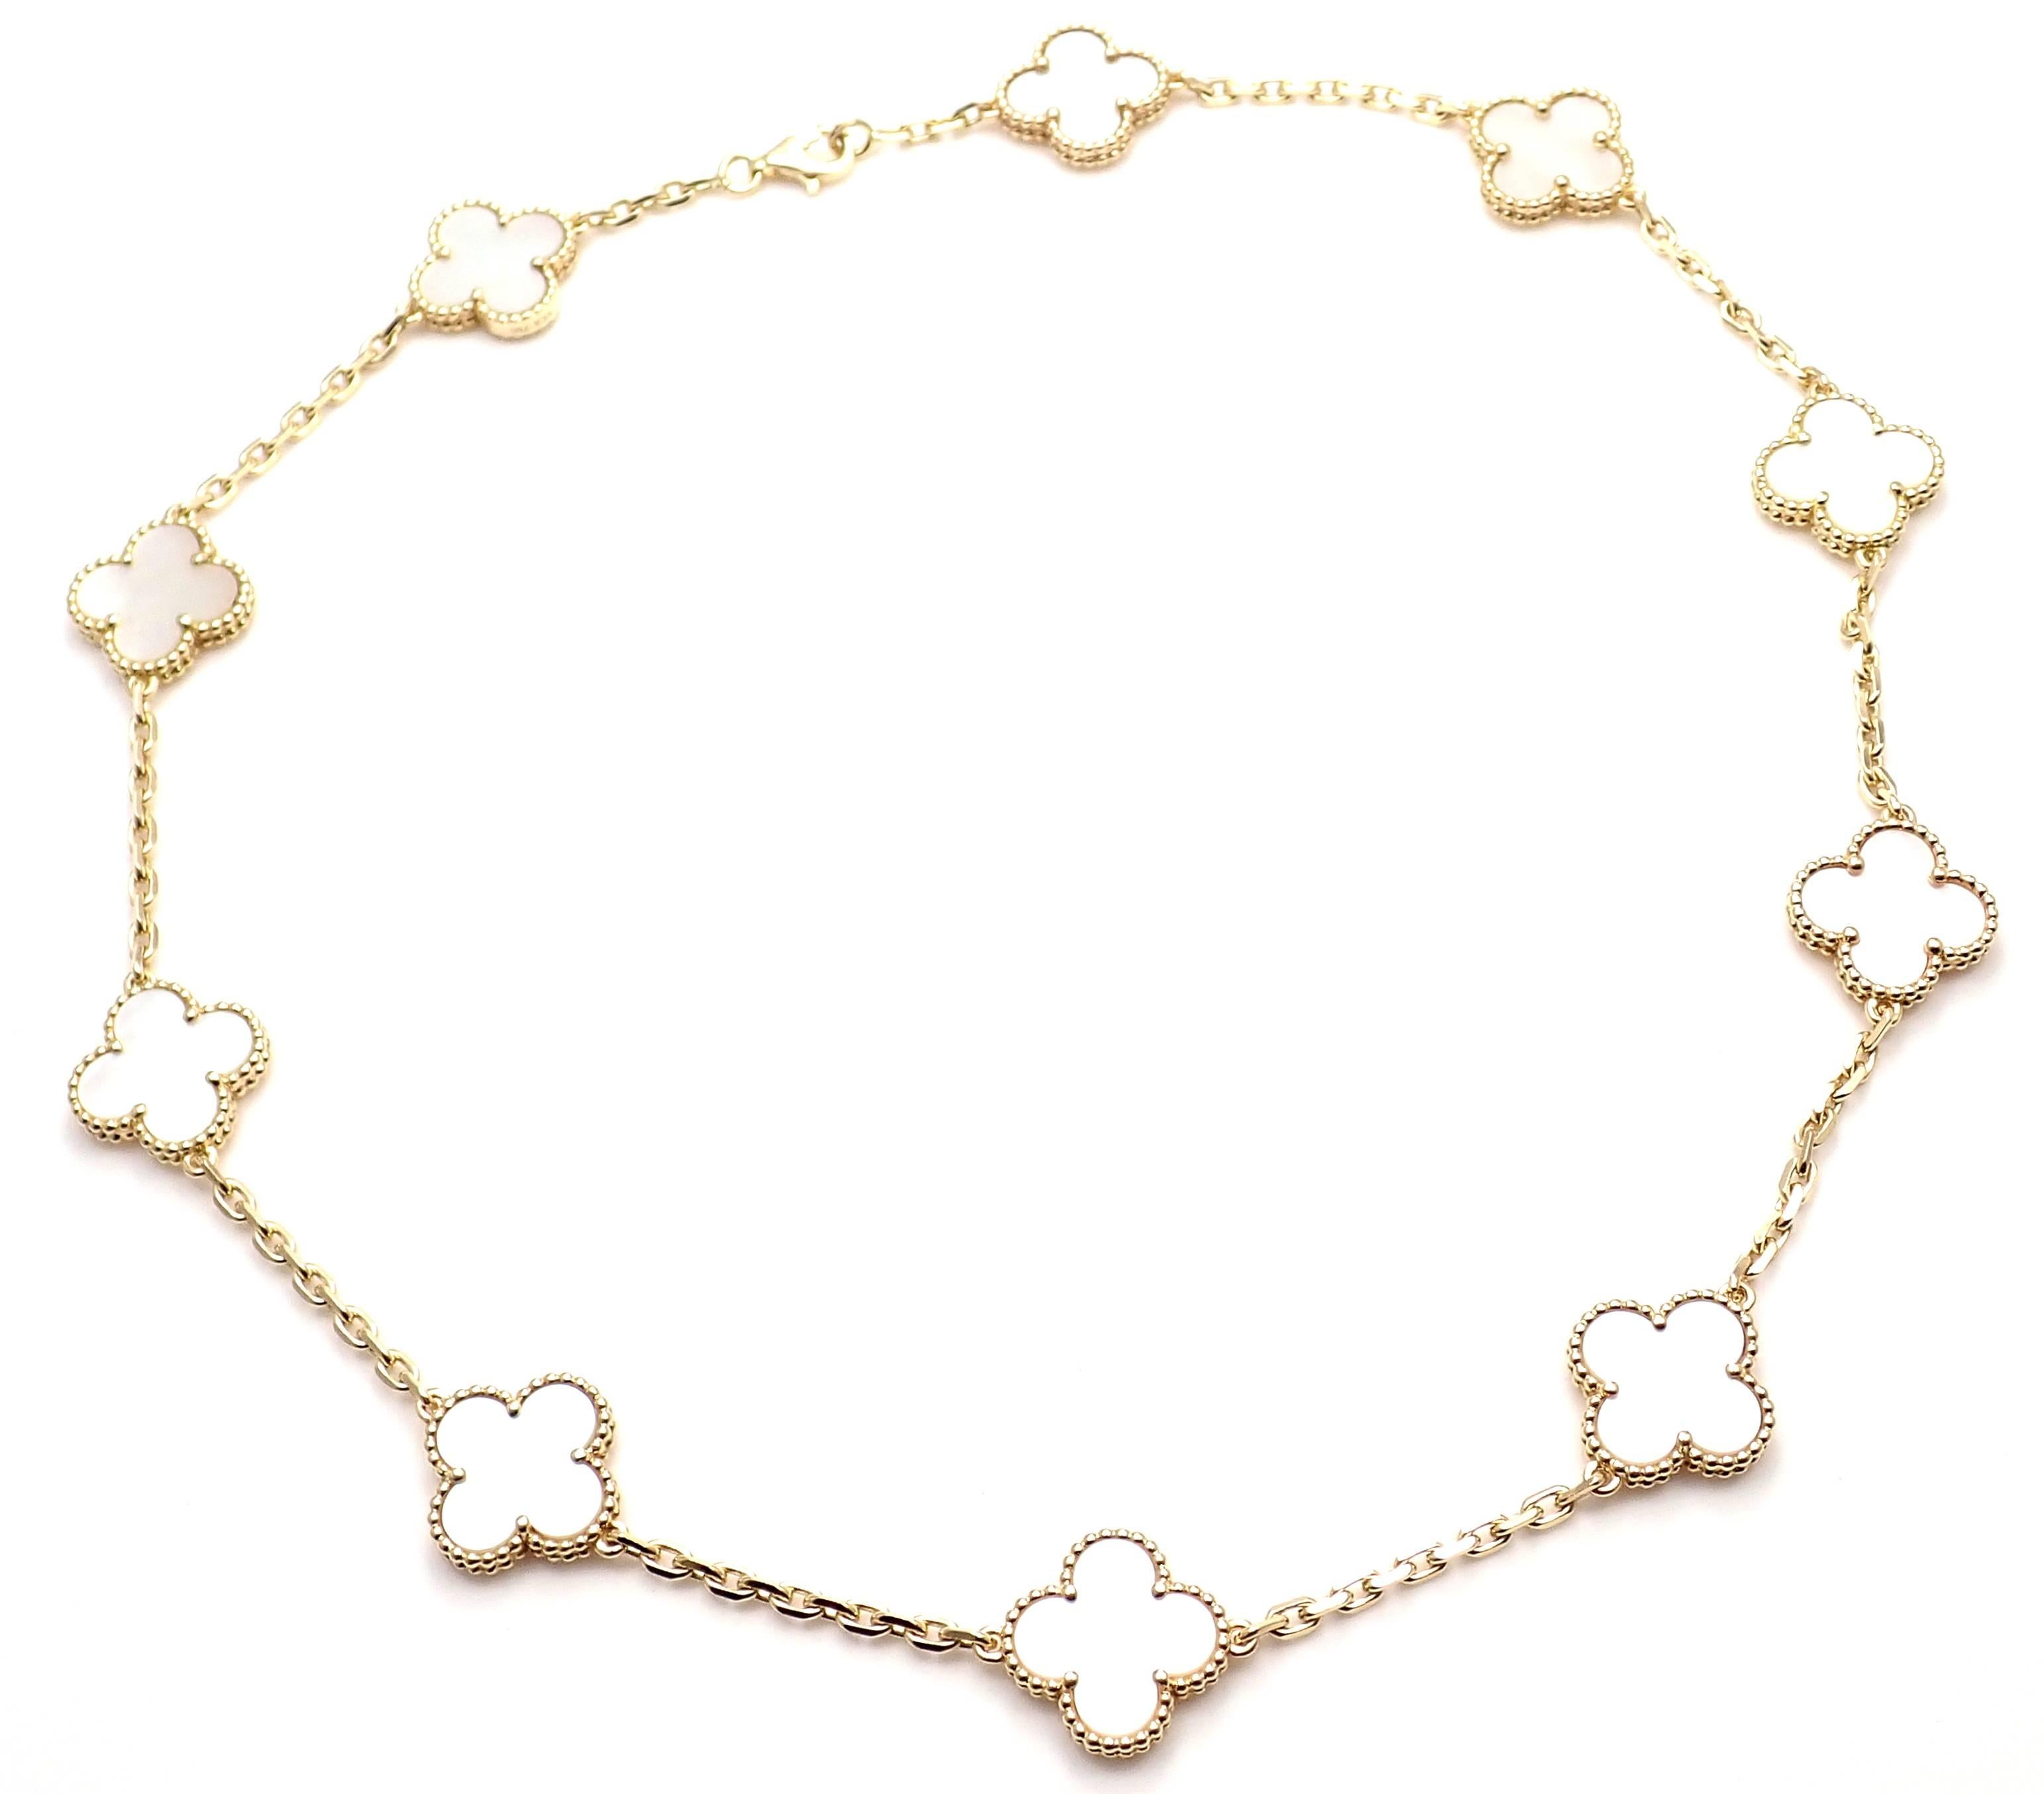 18k Yellow Gold Alhambra 10 Motifs Mother Of Pearl Necklace by Van Cleef & Arpels. 
With 10 motifs of mother of pearl Alhambra stones 15mm each 
Details: 
Length: 16.8
Width: 15mm 
Weight: 22.4 grams
Stamped Hallmarks:  VCA 750 CL98828
*Free